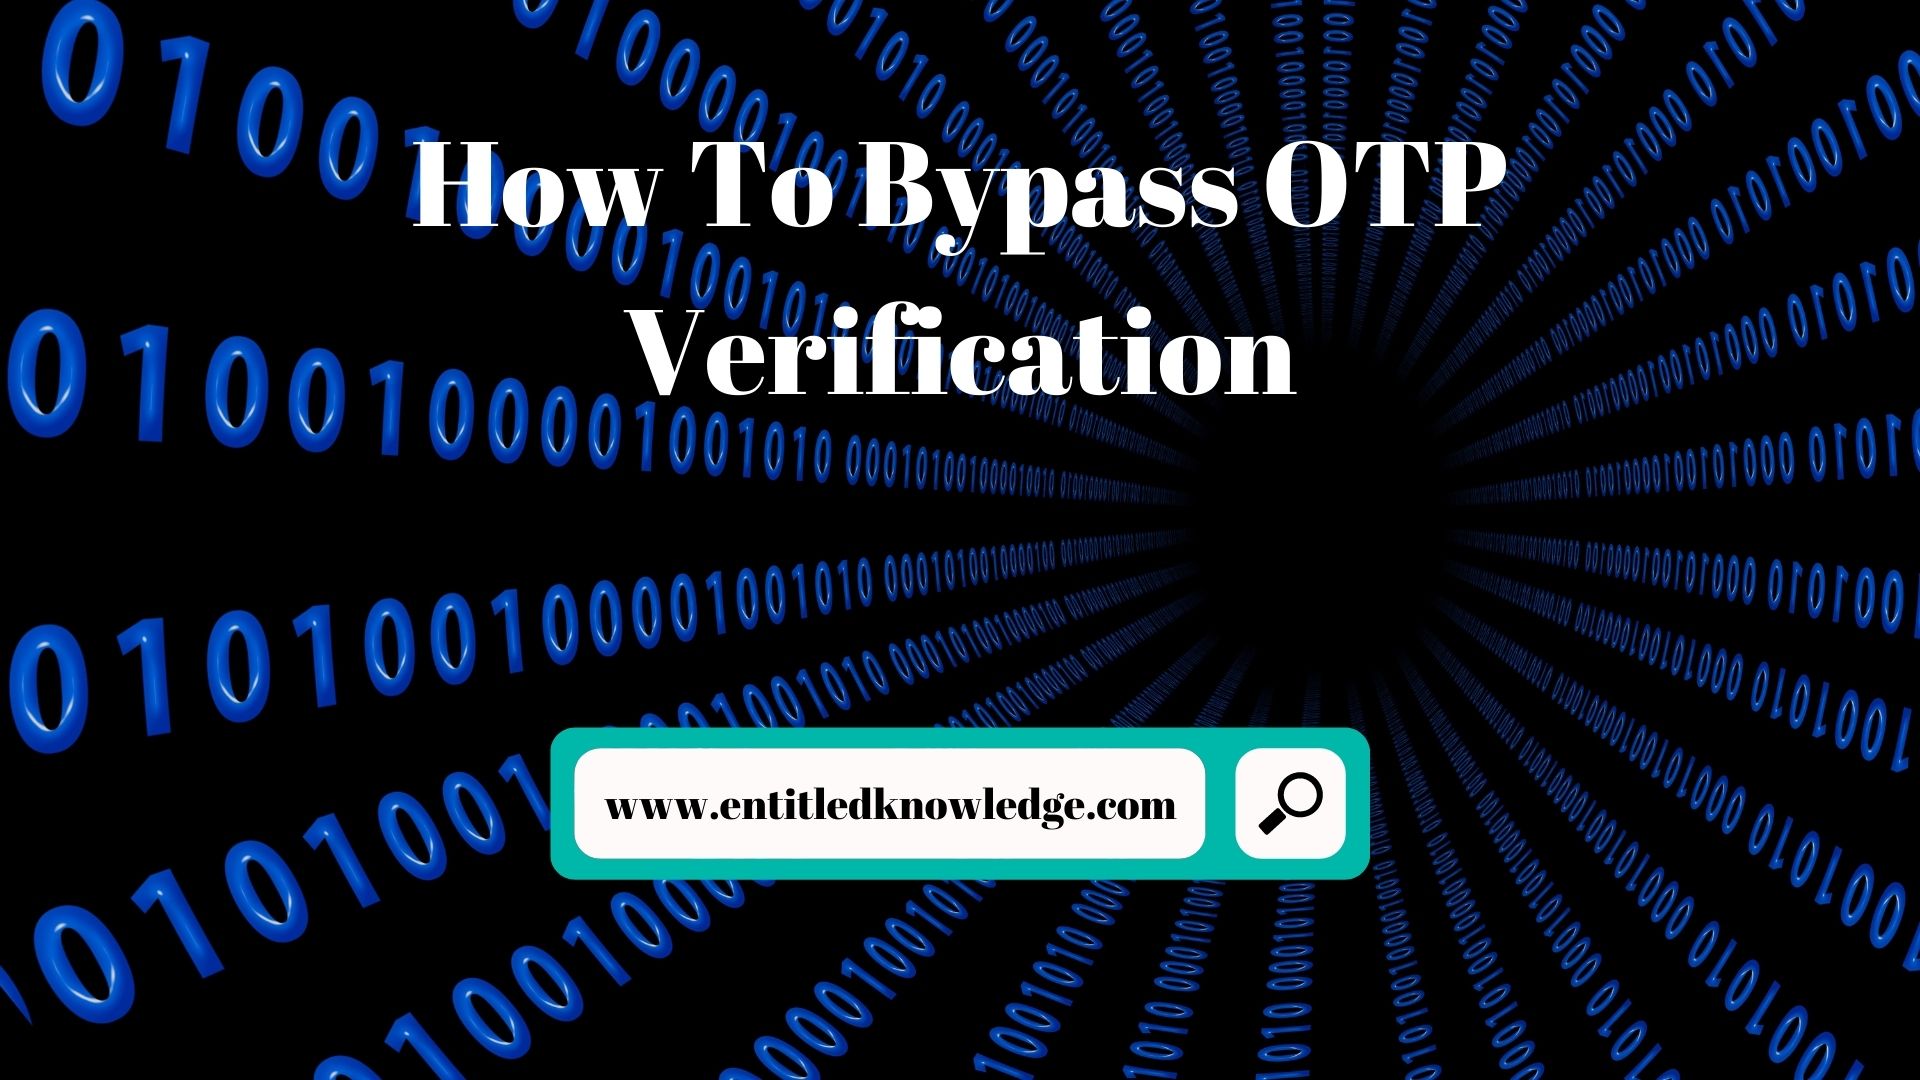 how to bypass otp verification on any website / app